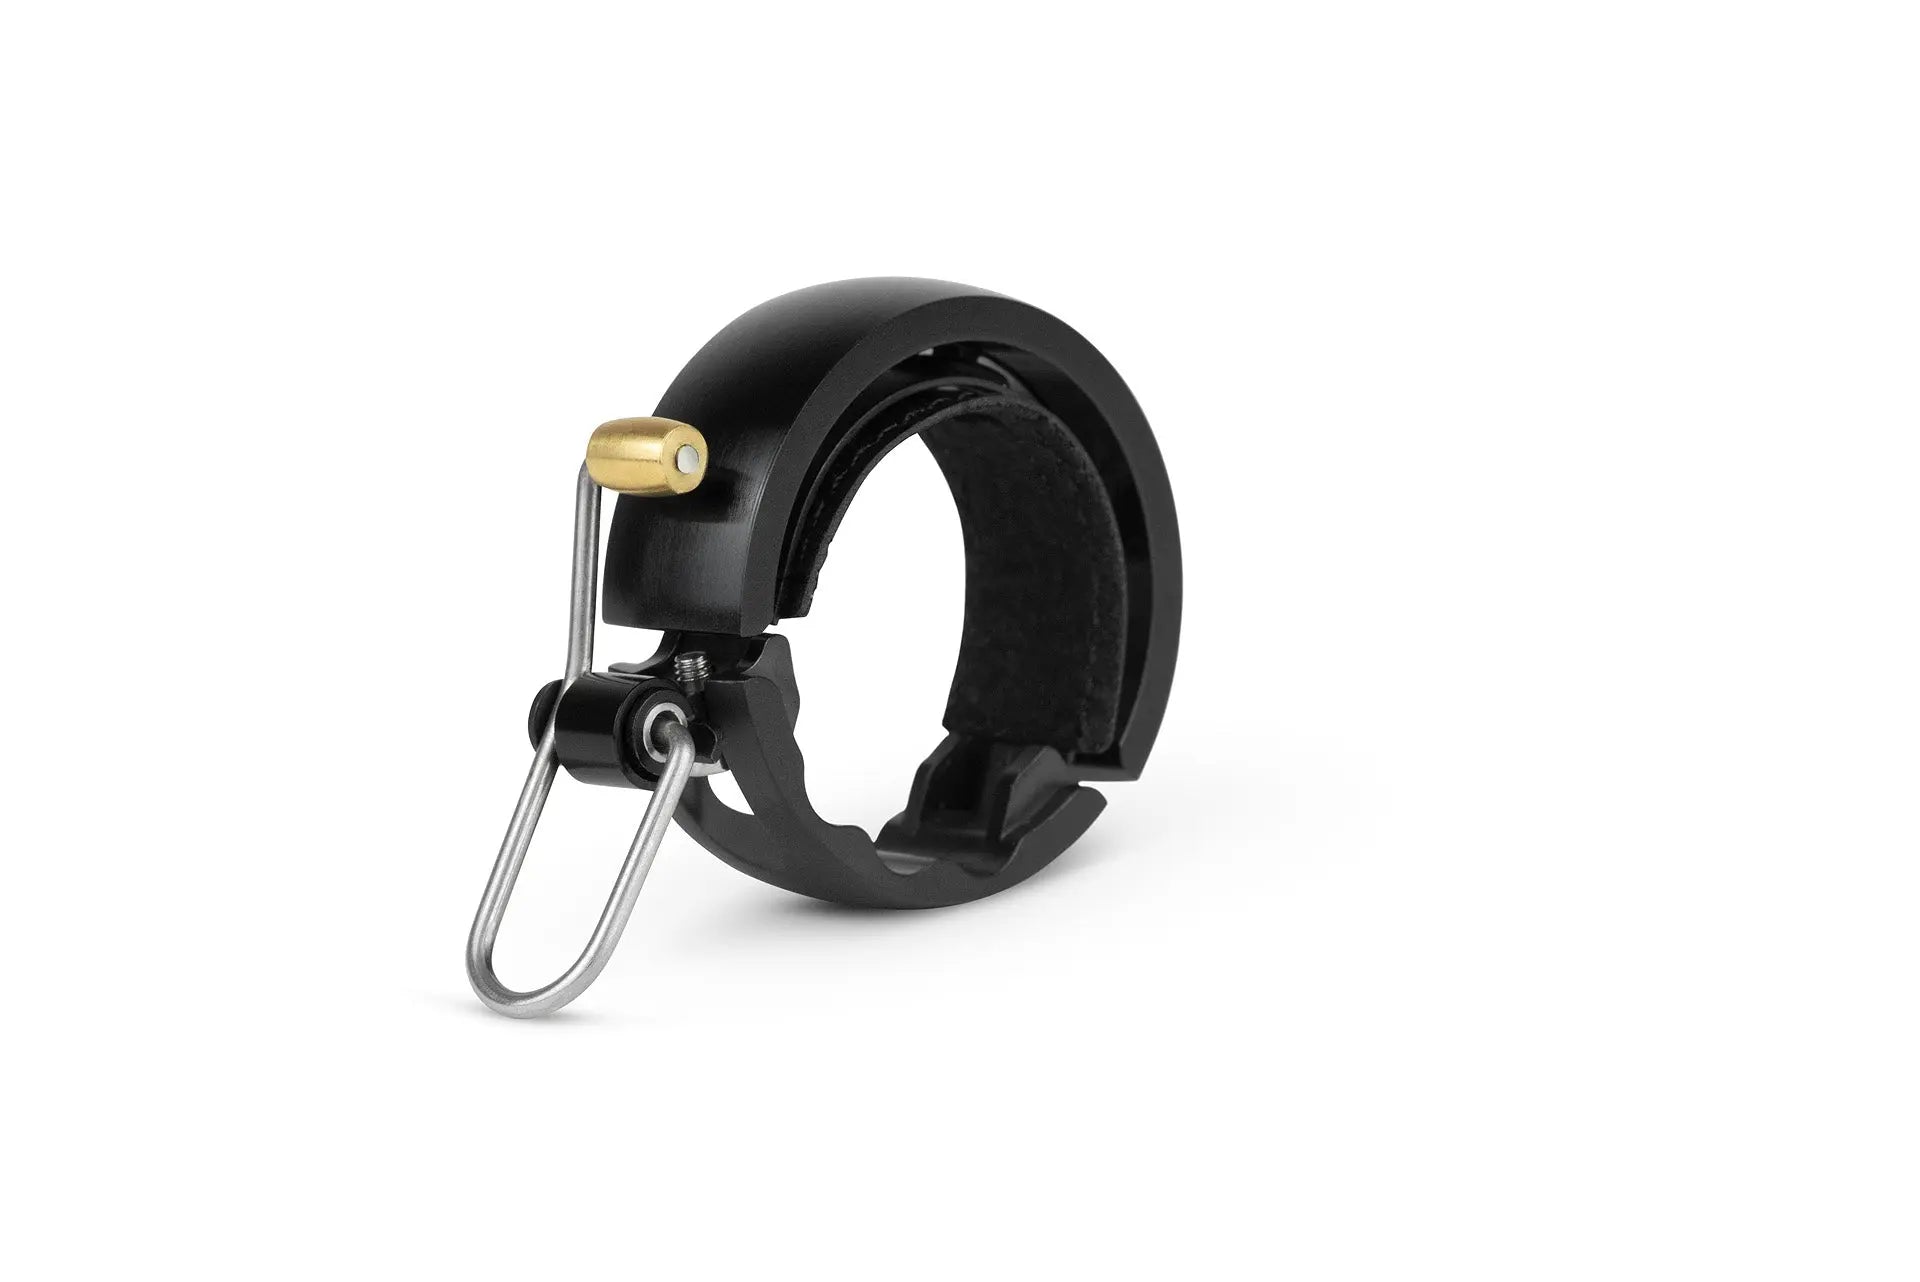 Knog Oi Deluxe Bell-Wabi Cycles